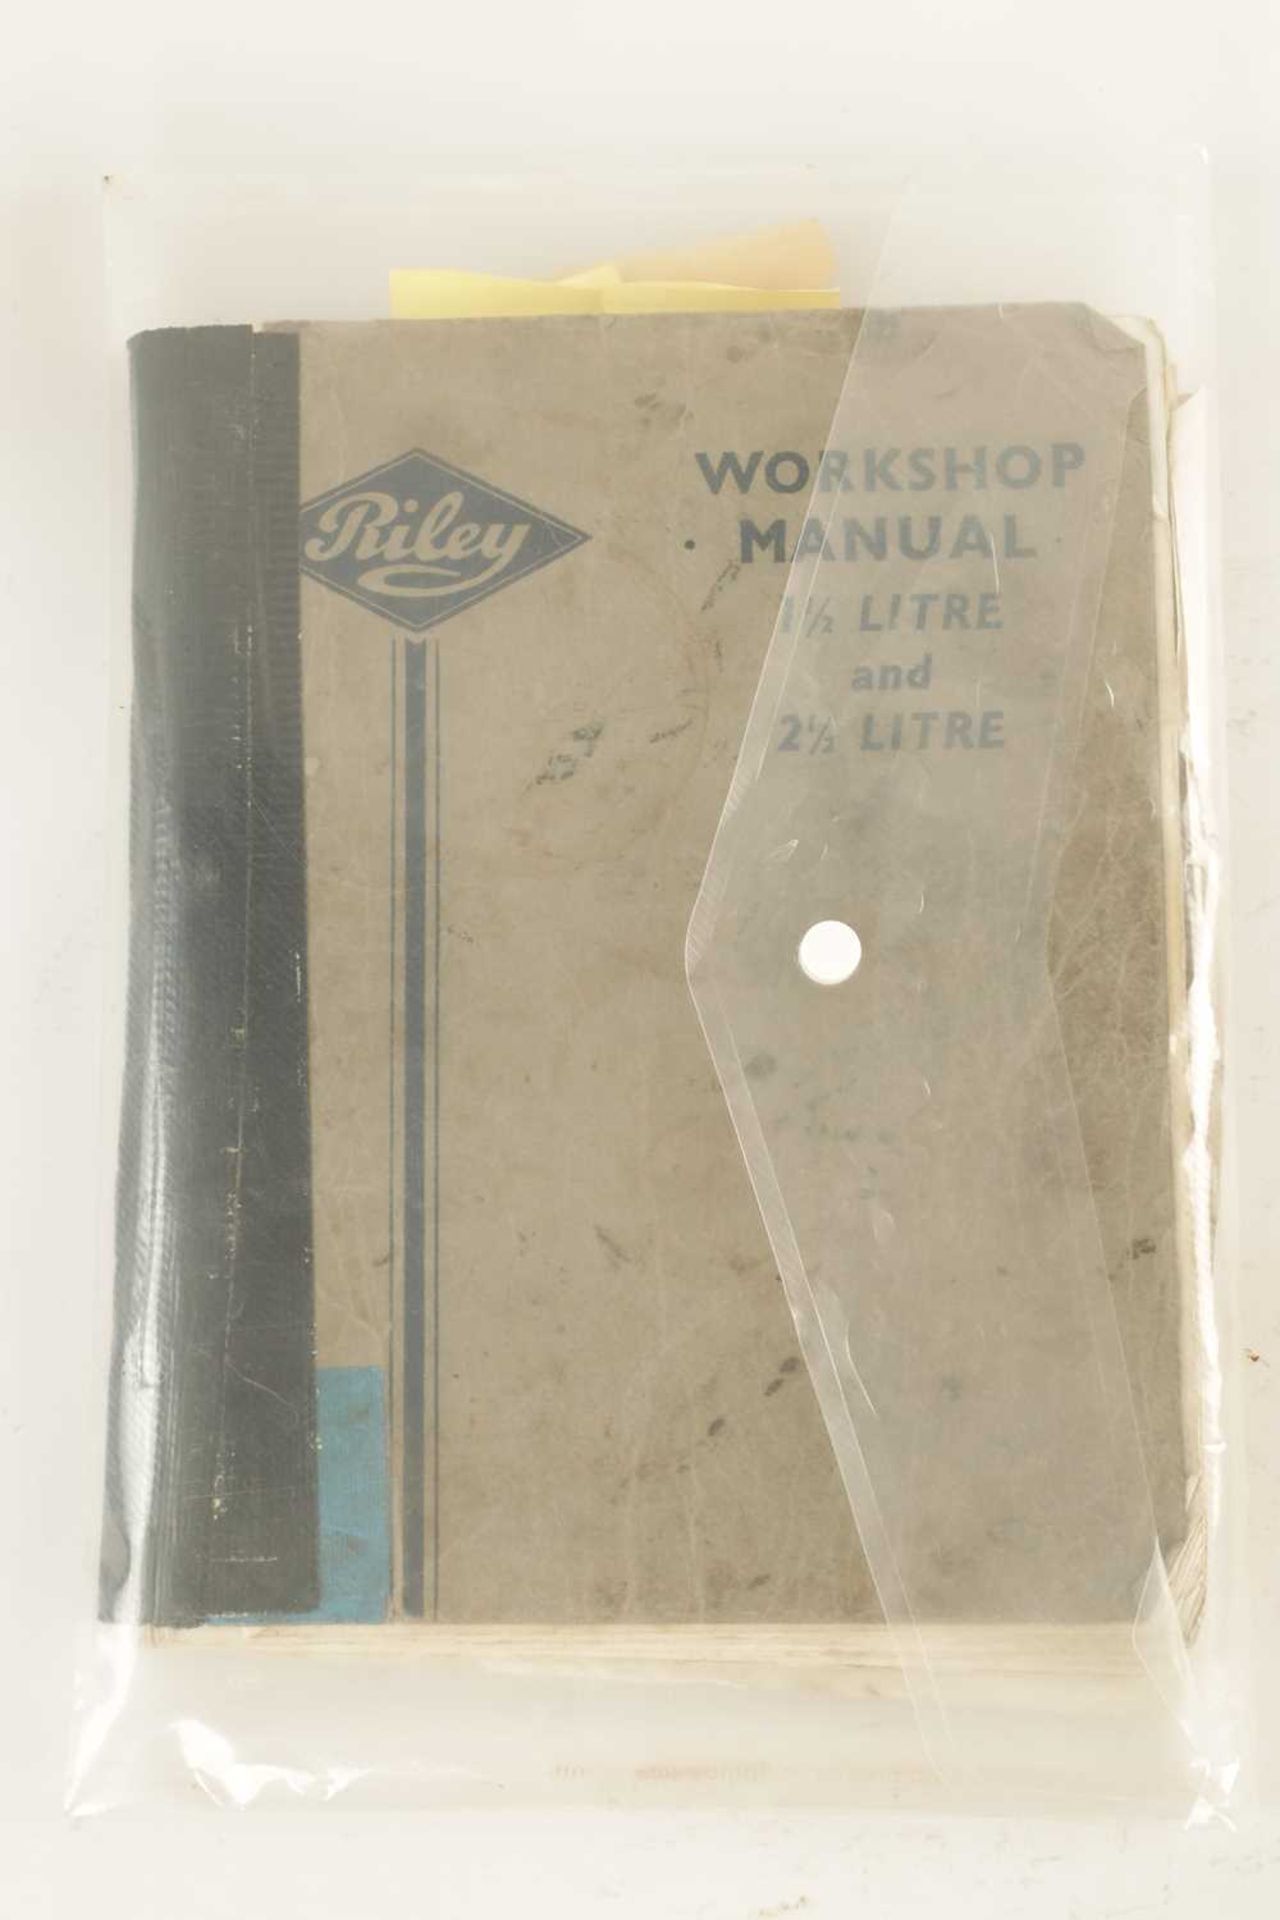 A COLLECTION OF VARIOUS RILEY BOOKS AND WORKSHOP MANUAL - Image 3 of 10